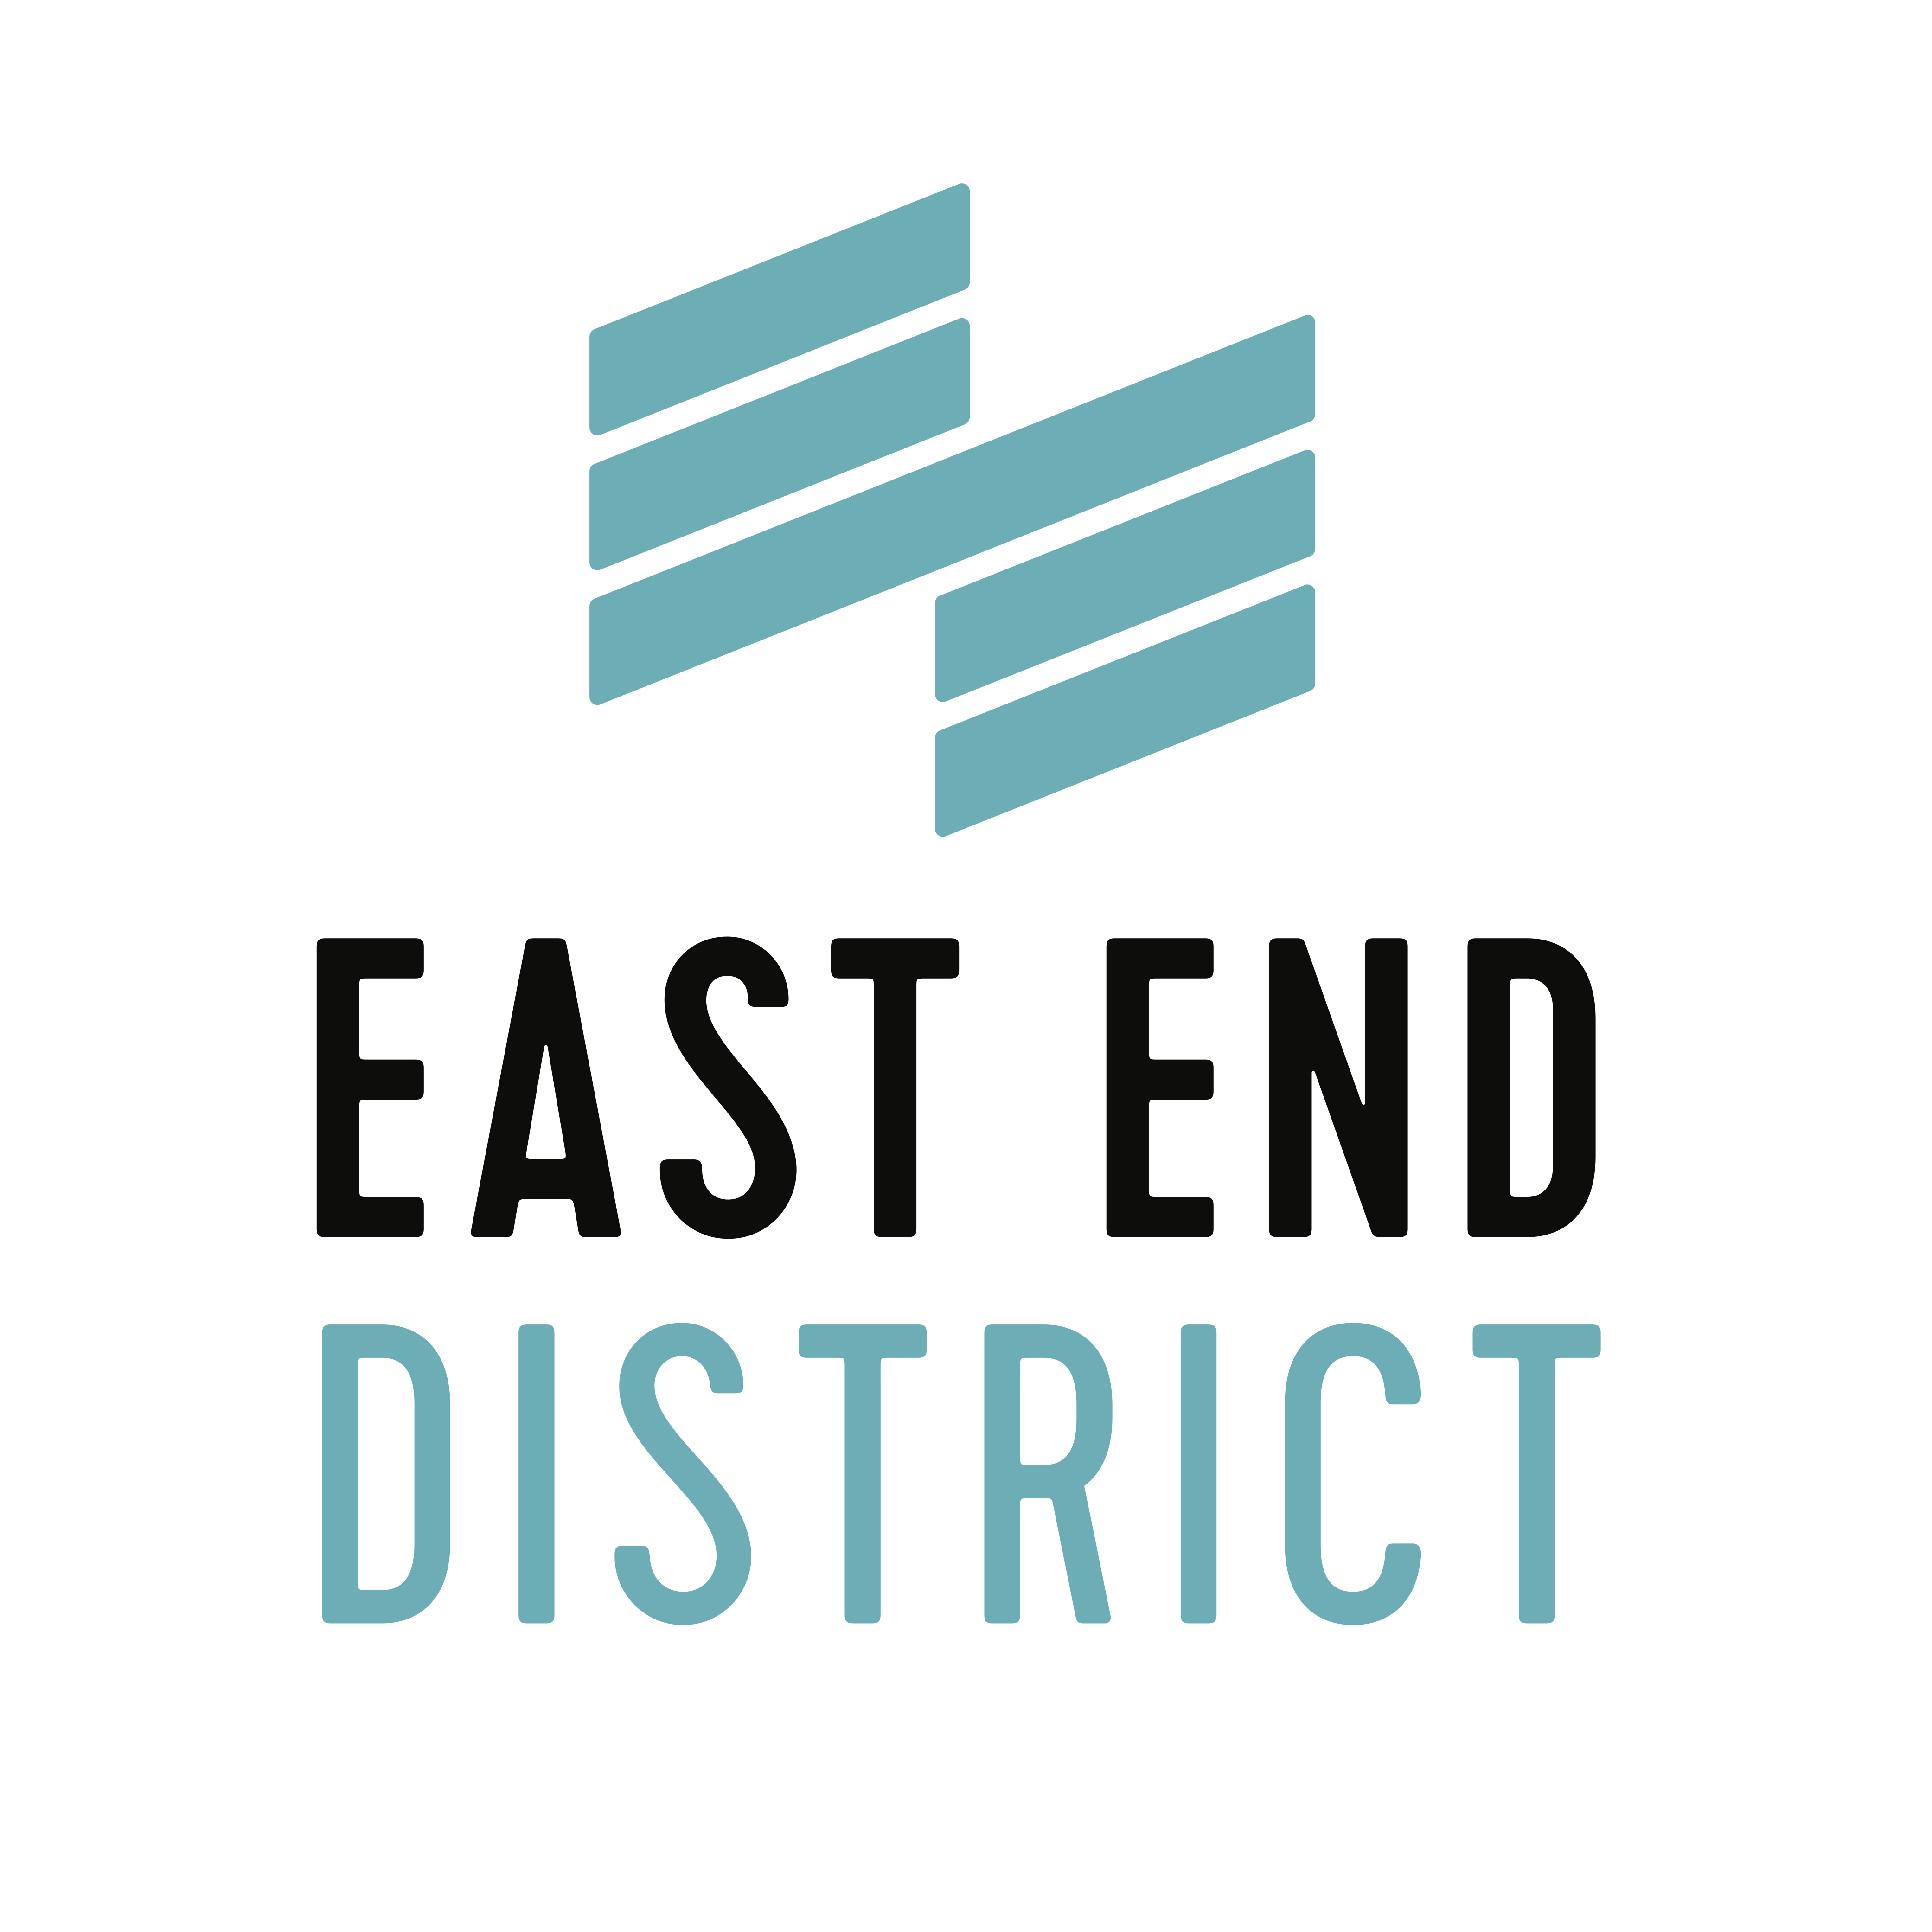 Greater East End Management District